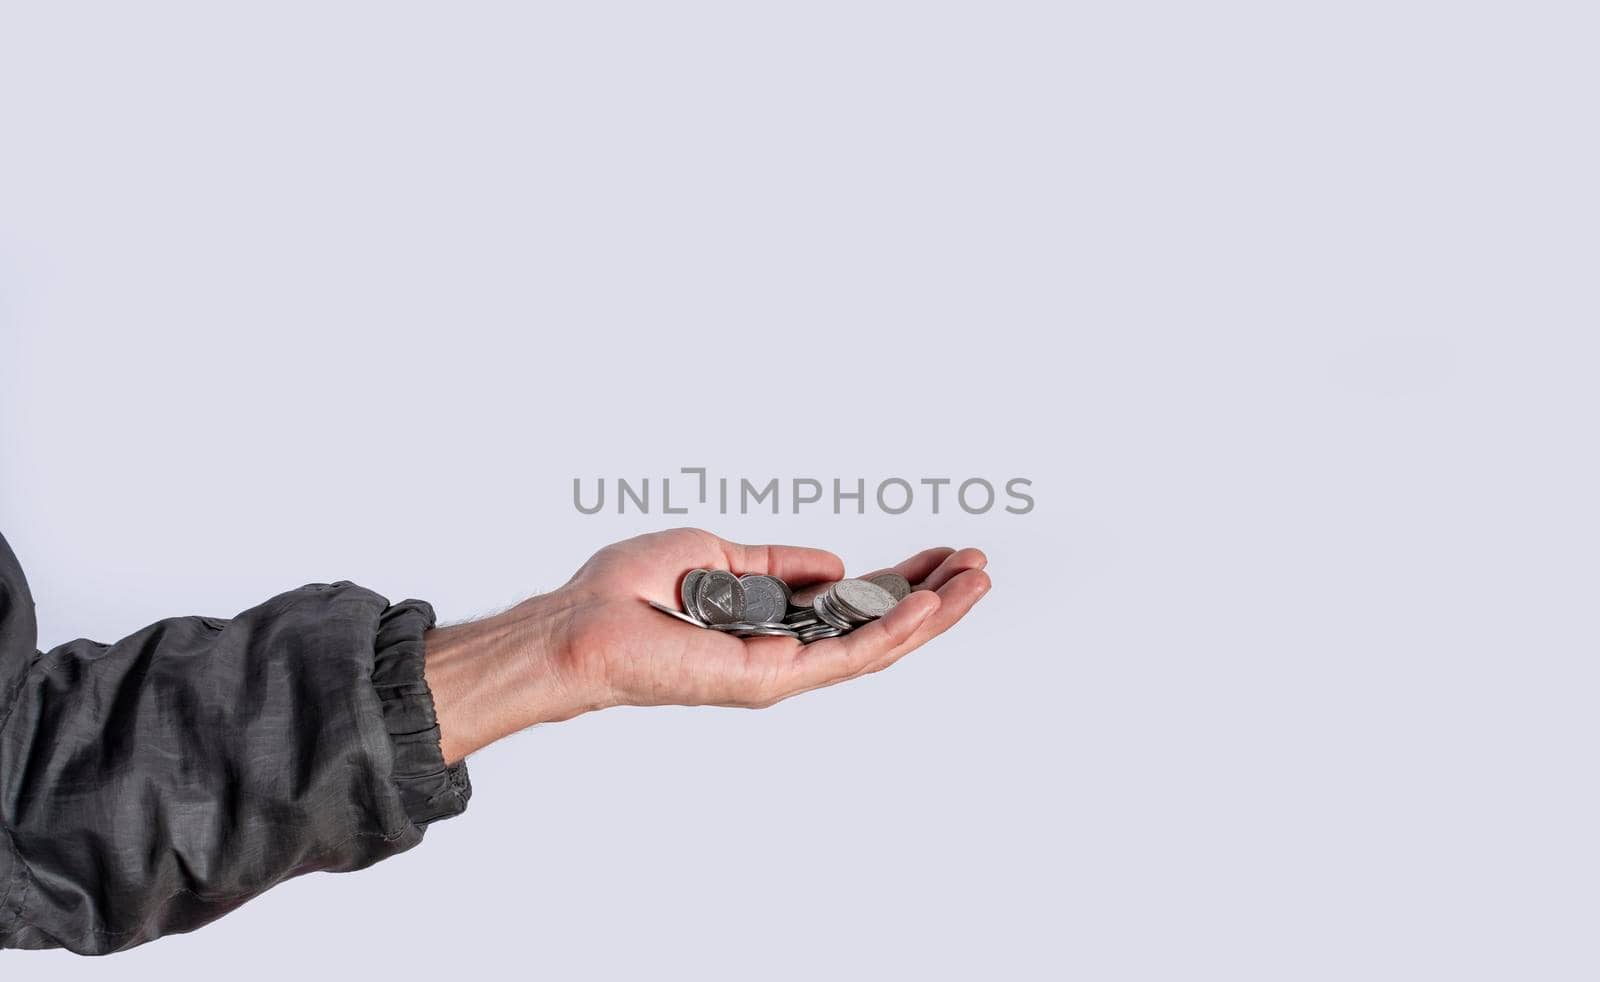 Hands with several coins in isolated background, Close up of hand with several coins, currency savings concept